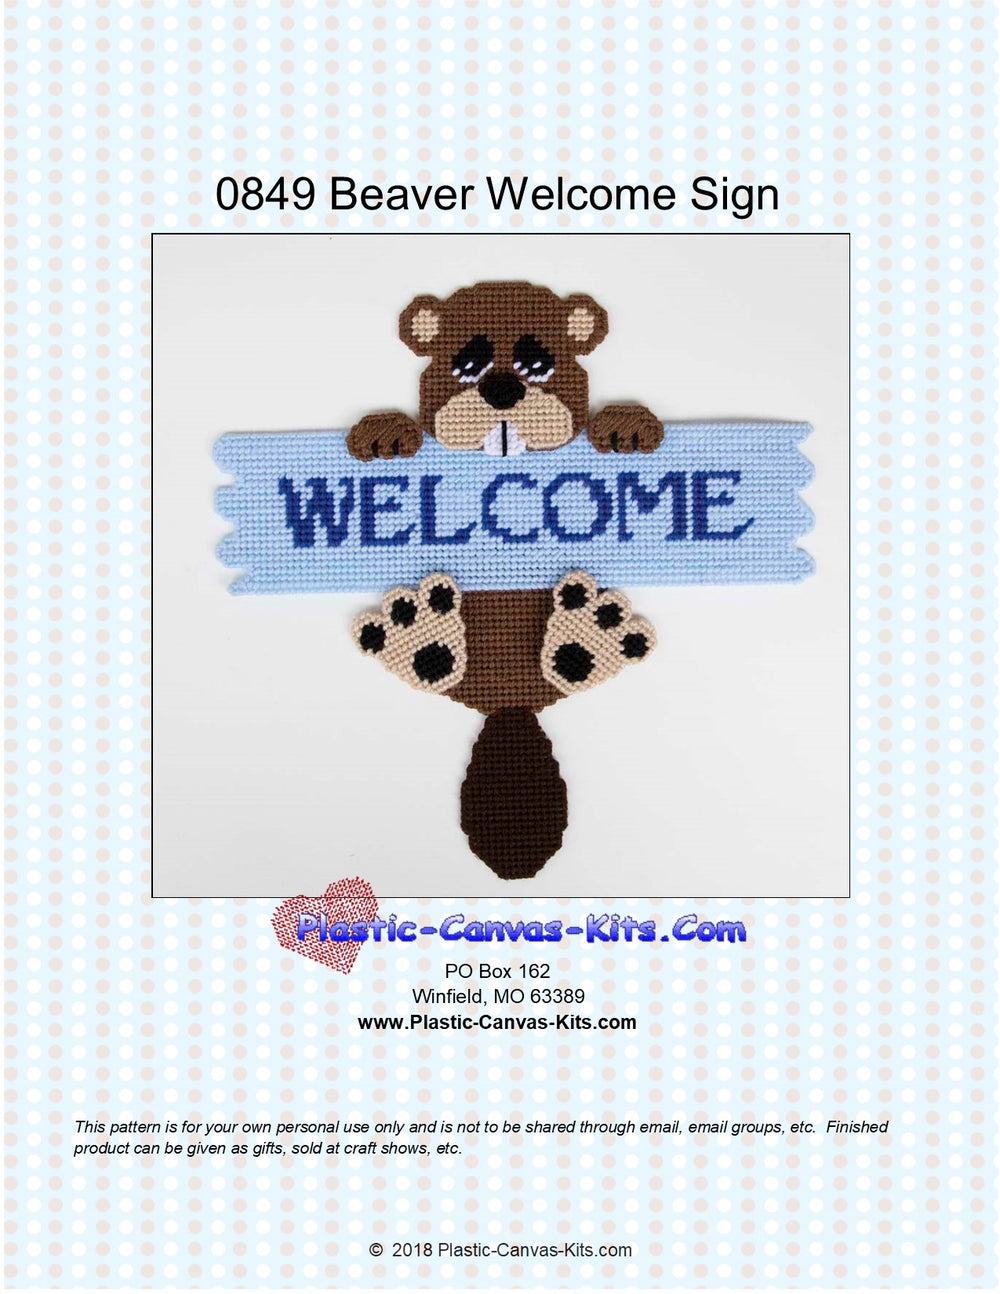 Beaver Welcome Sign